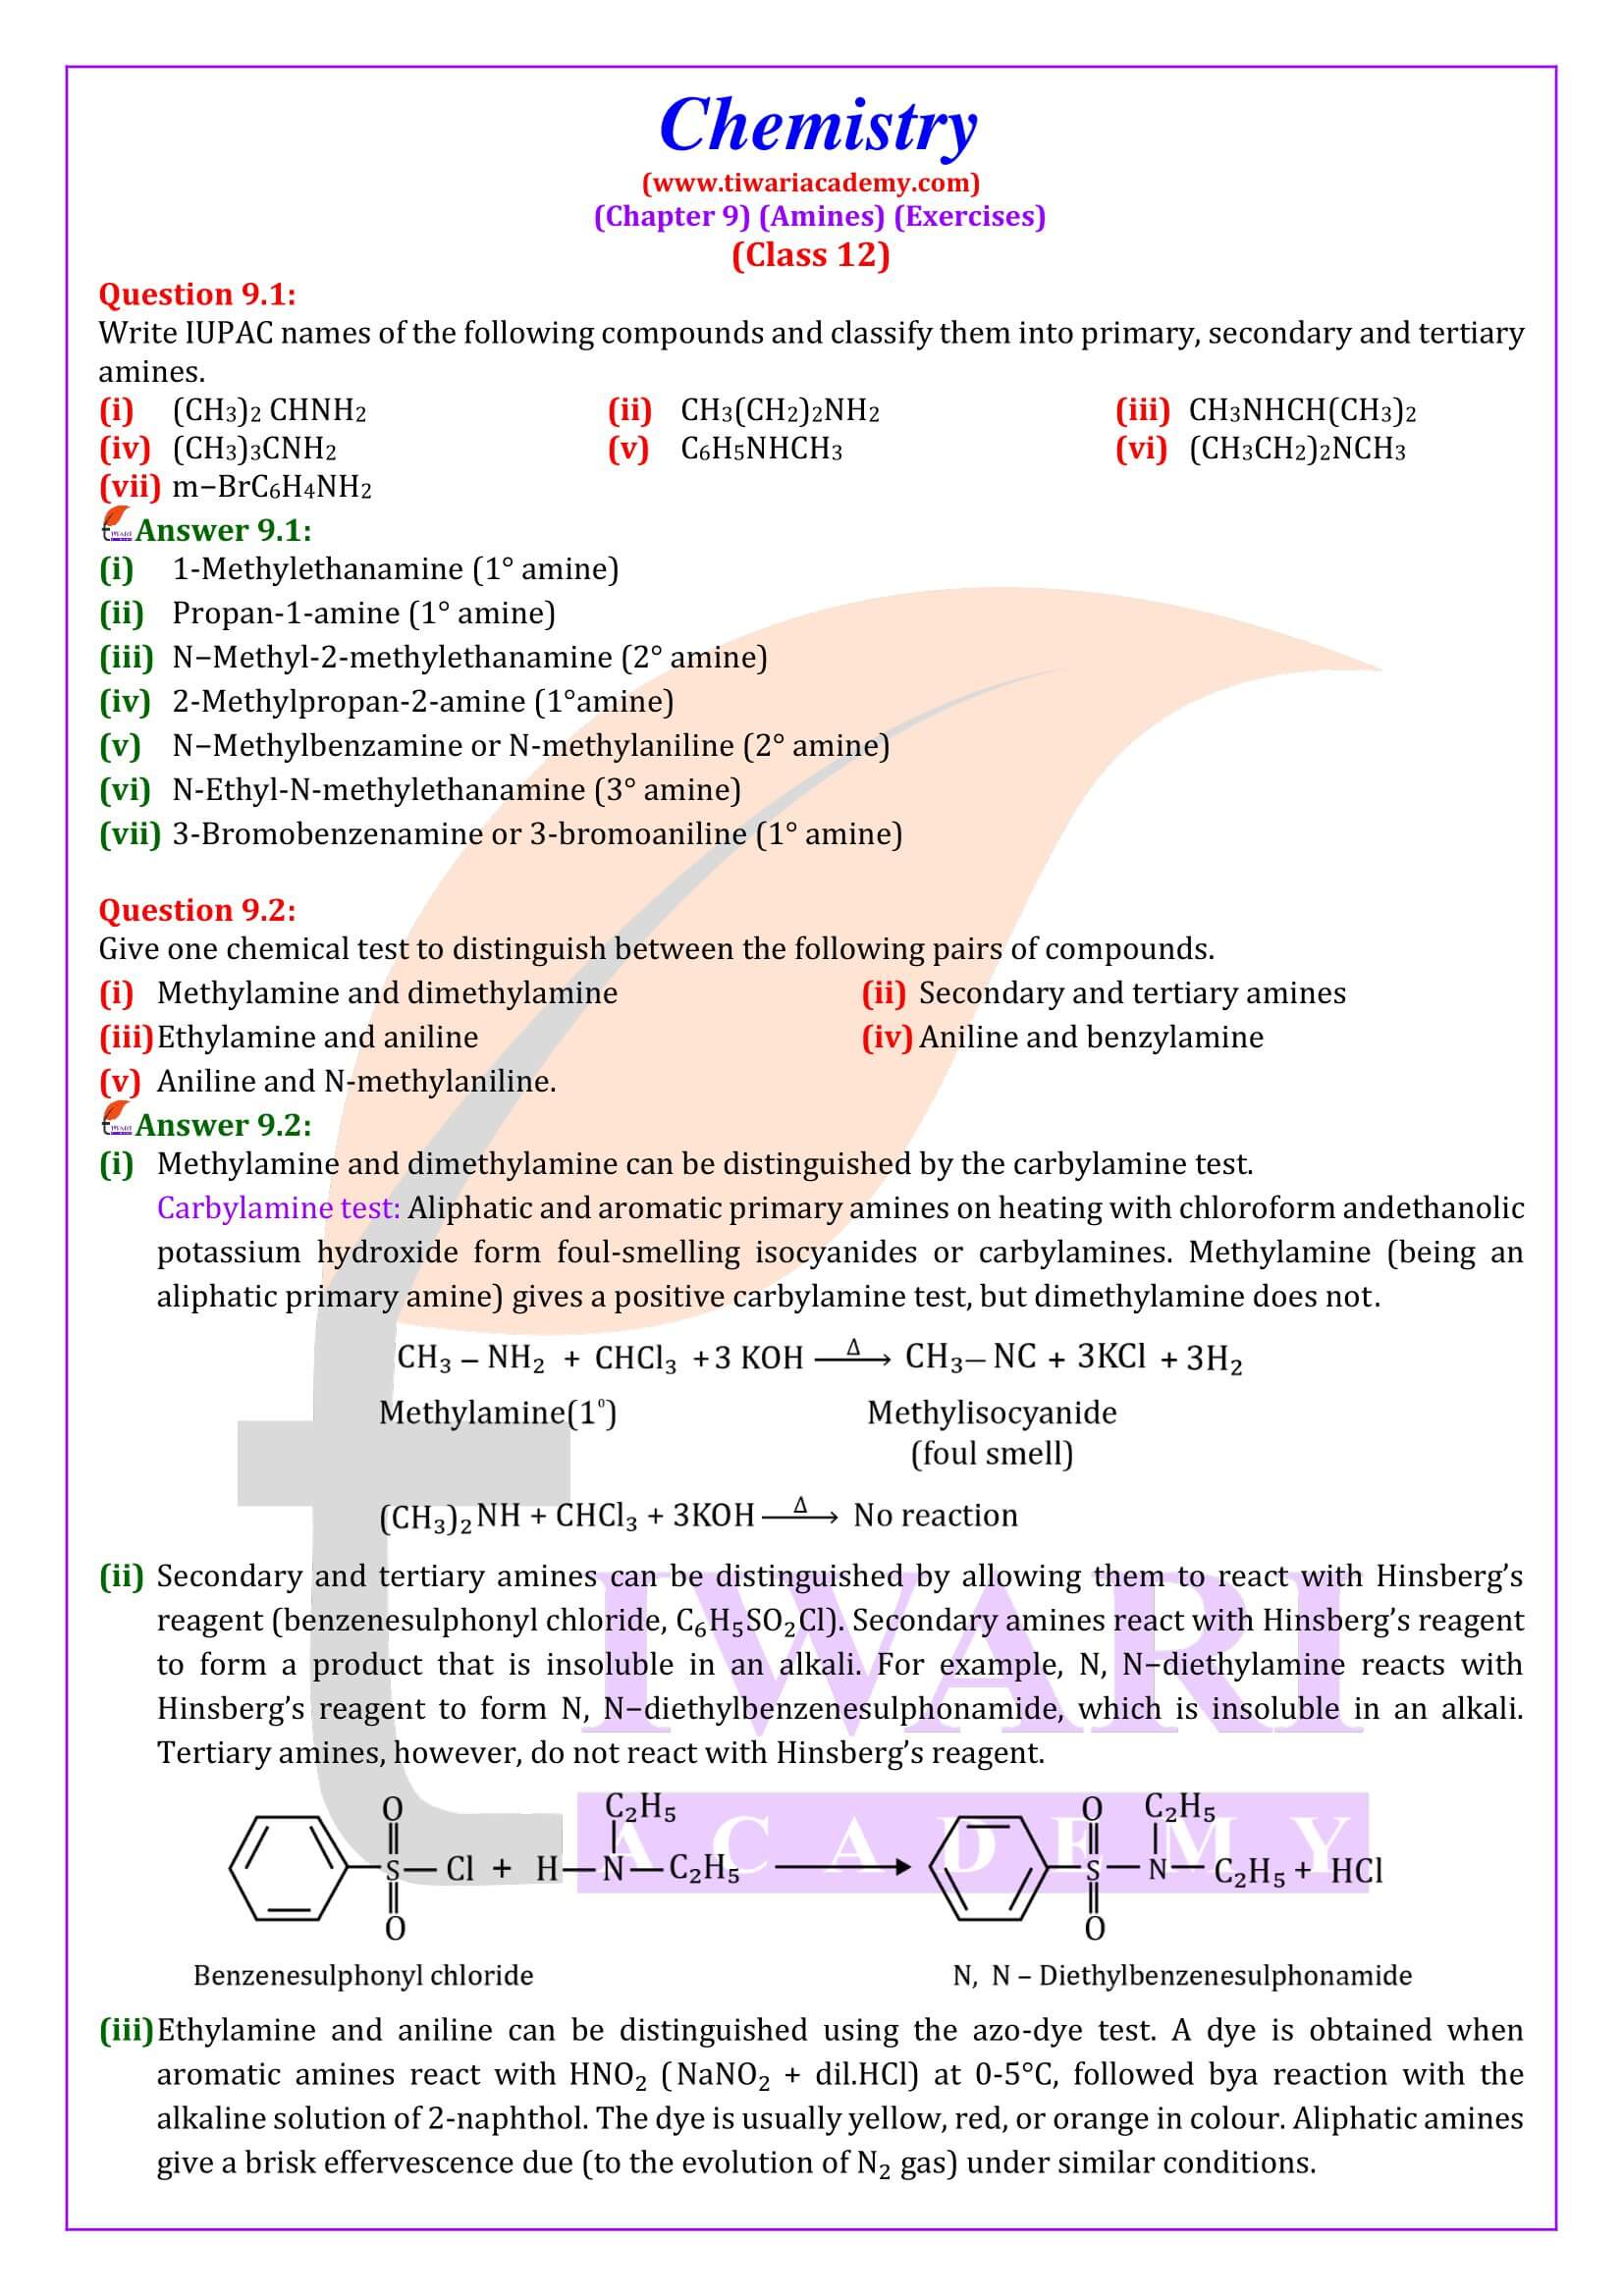 NCERT Solutions for Class 12 Chemistry Chapter 9 Amines